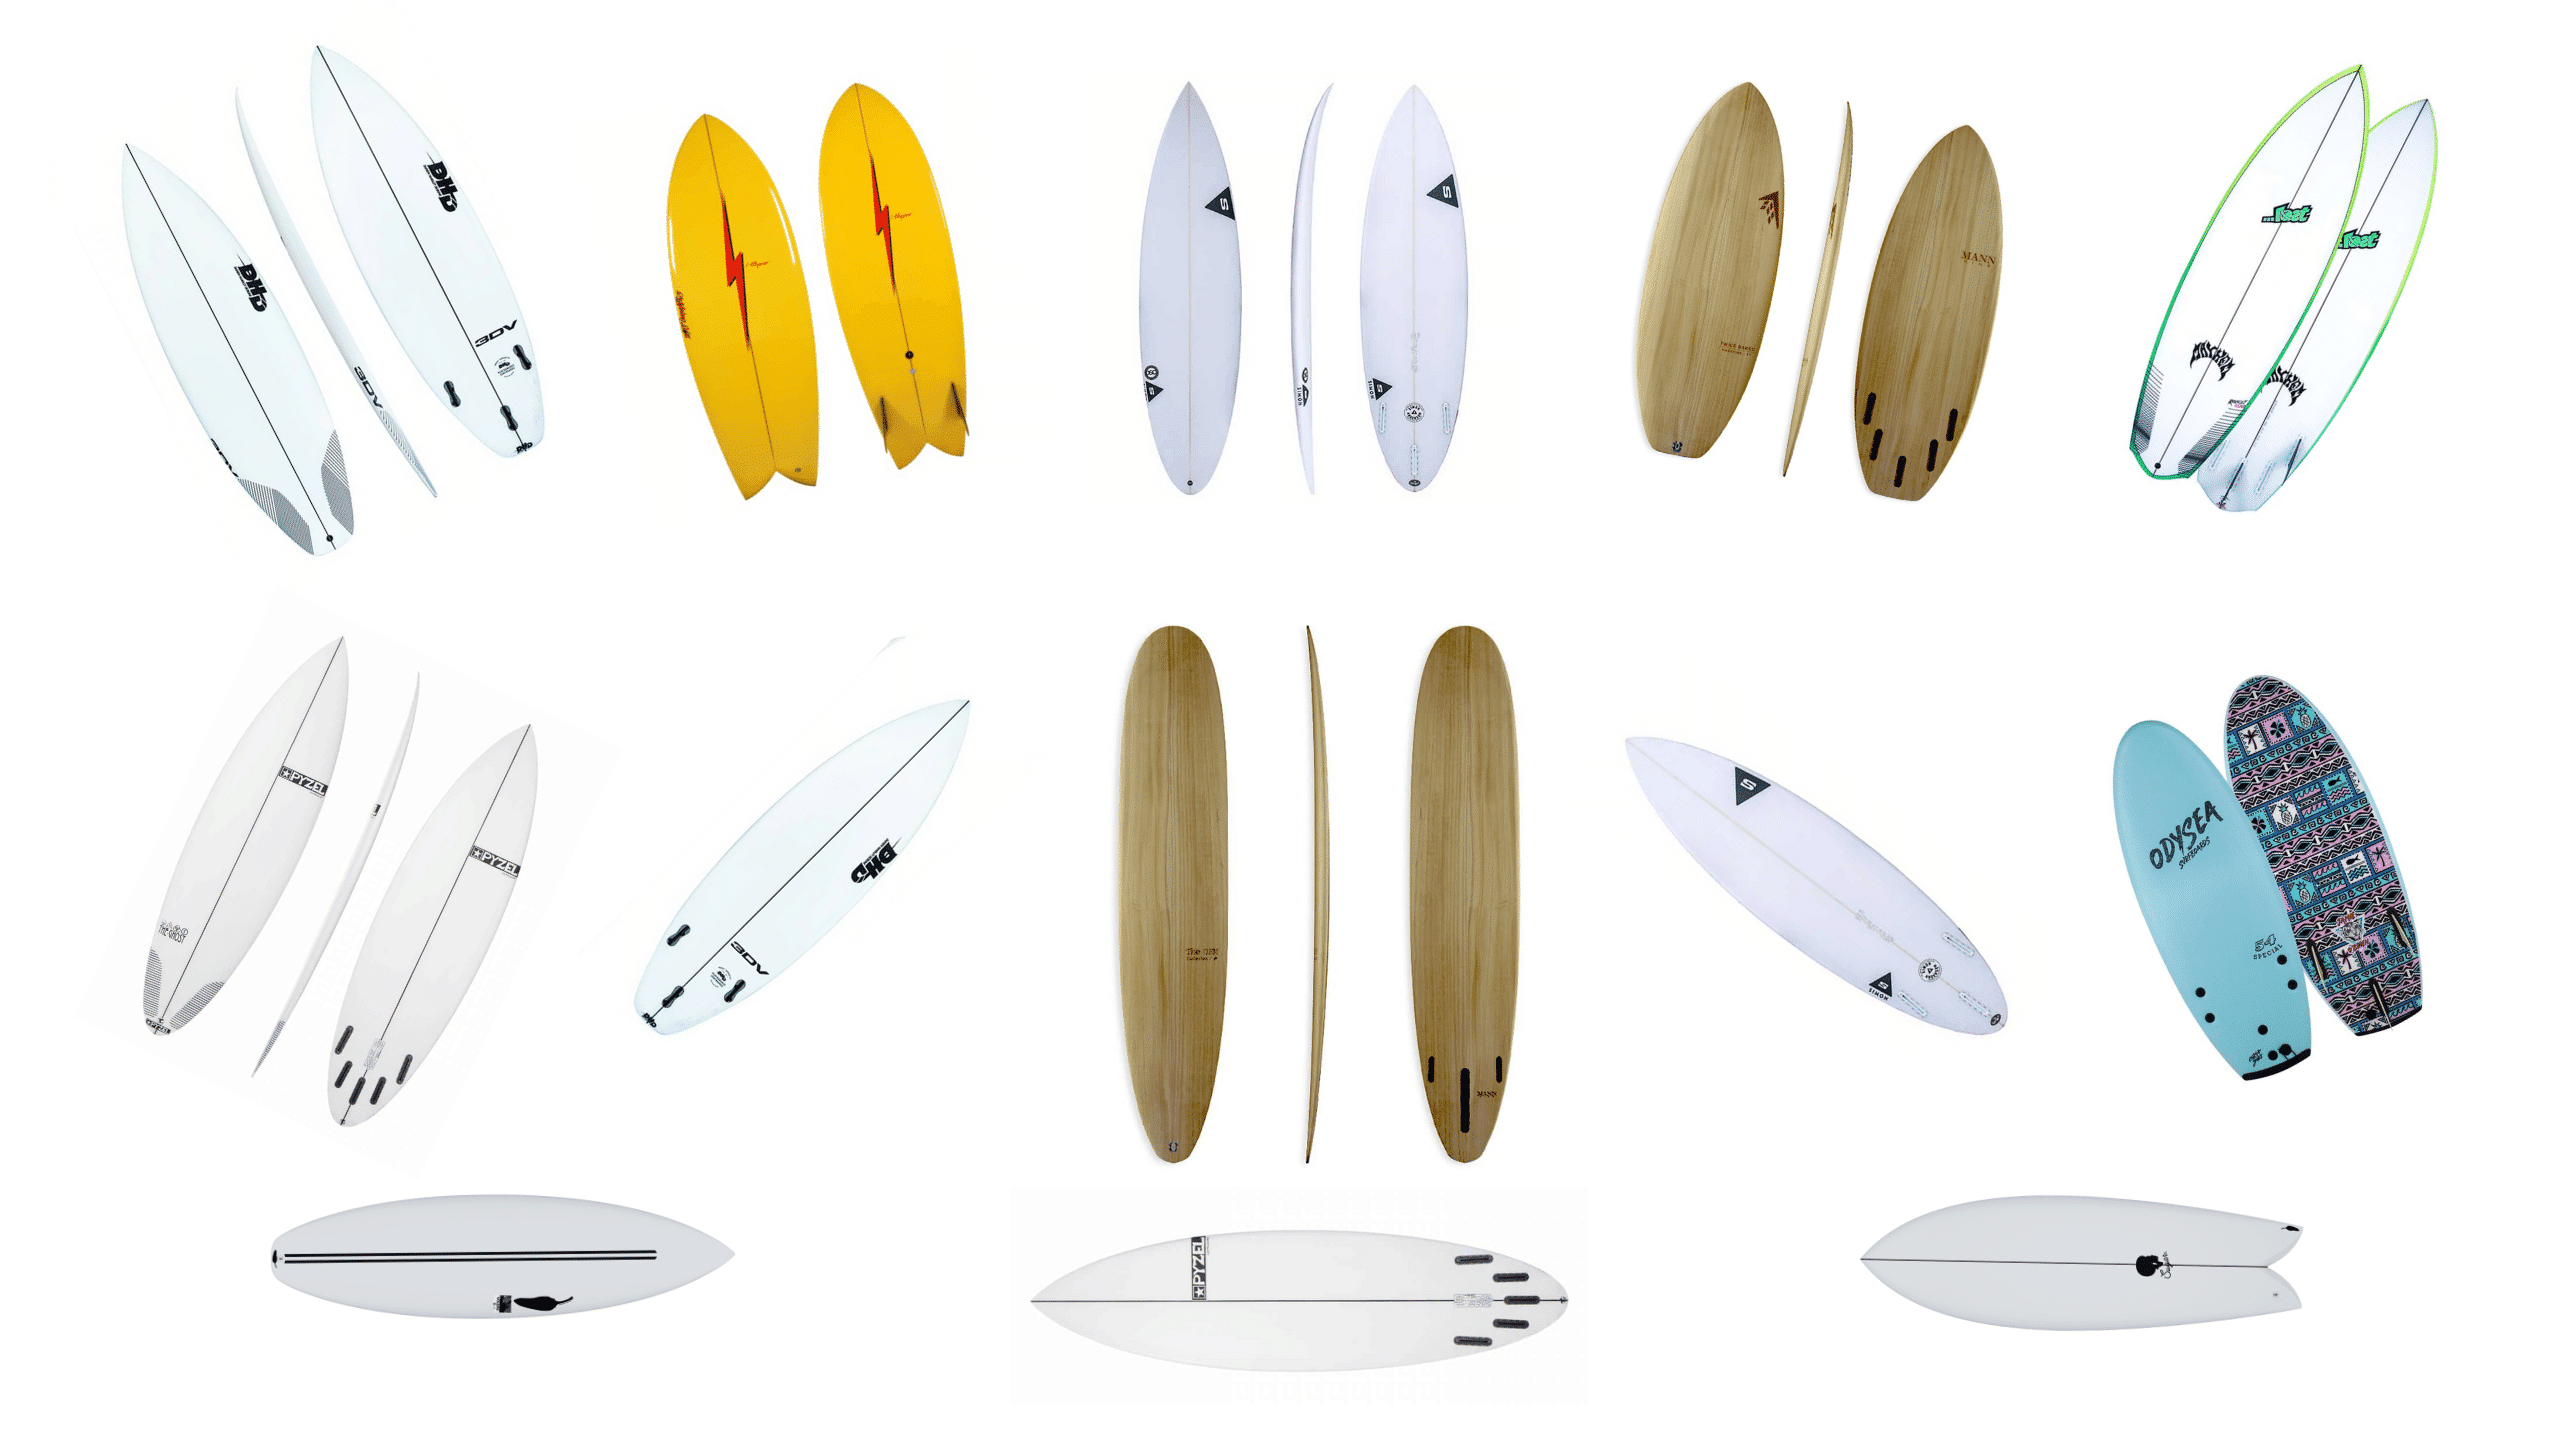 Daily 7'6 Soft-Top Surfboard with Removable Fins